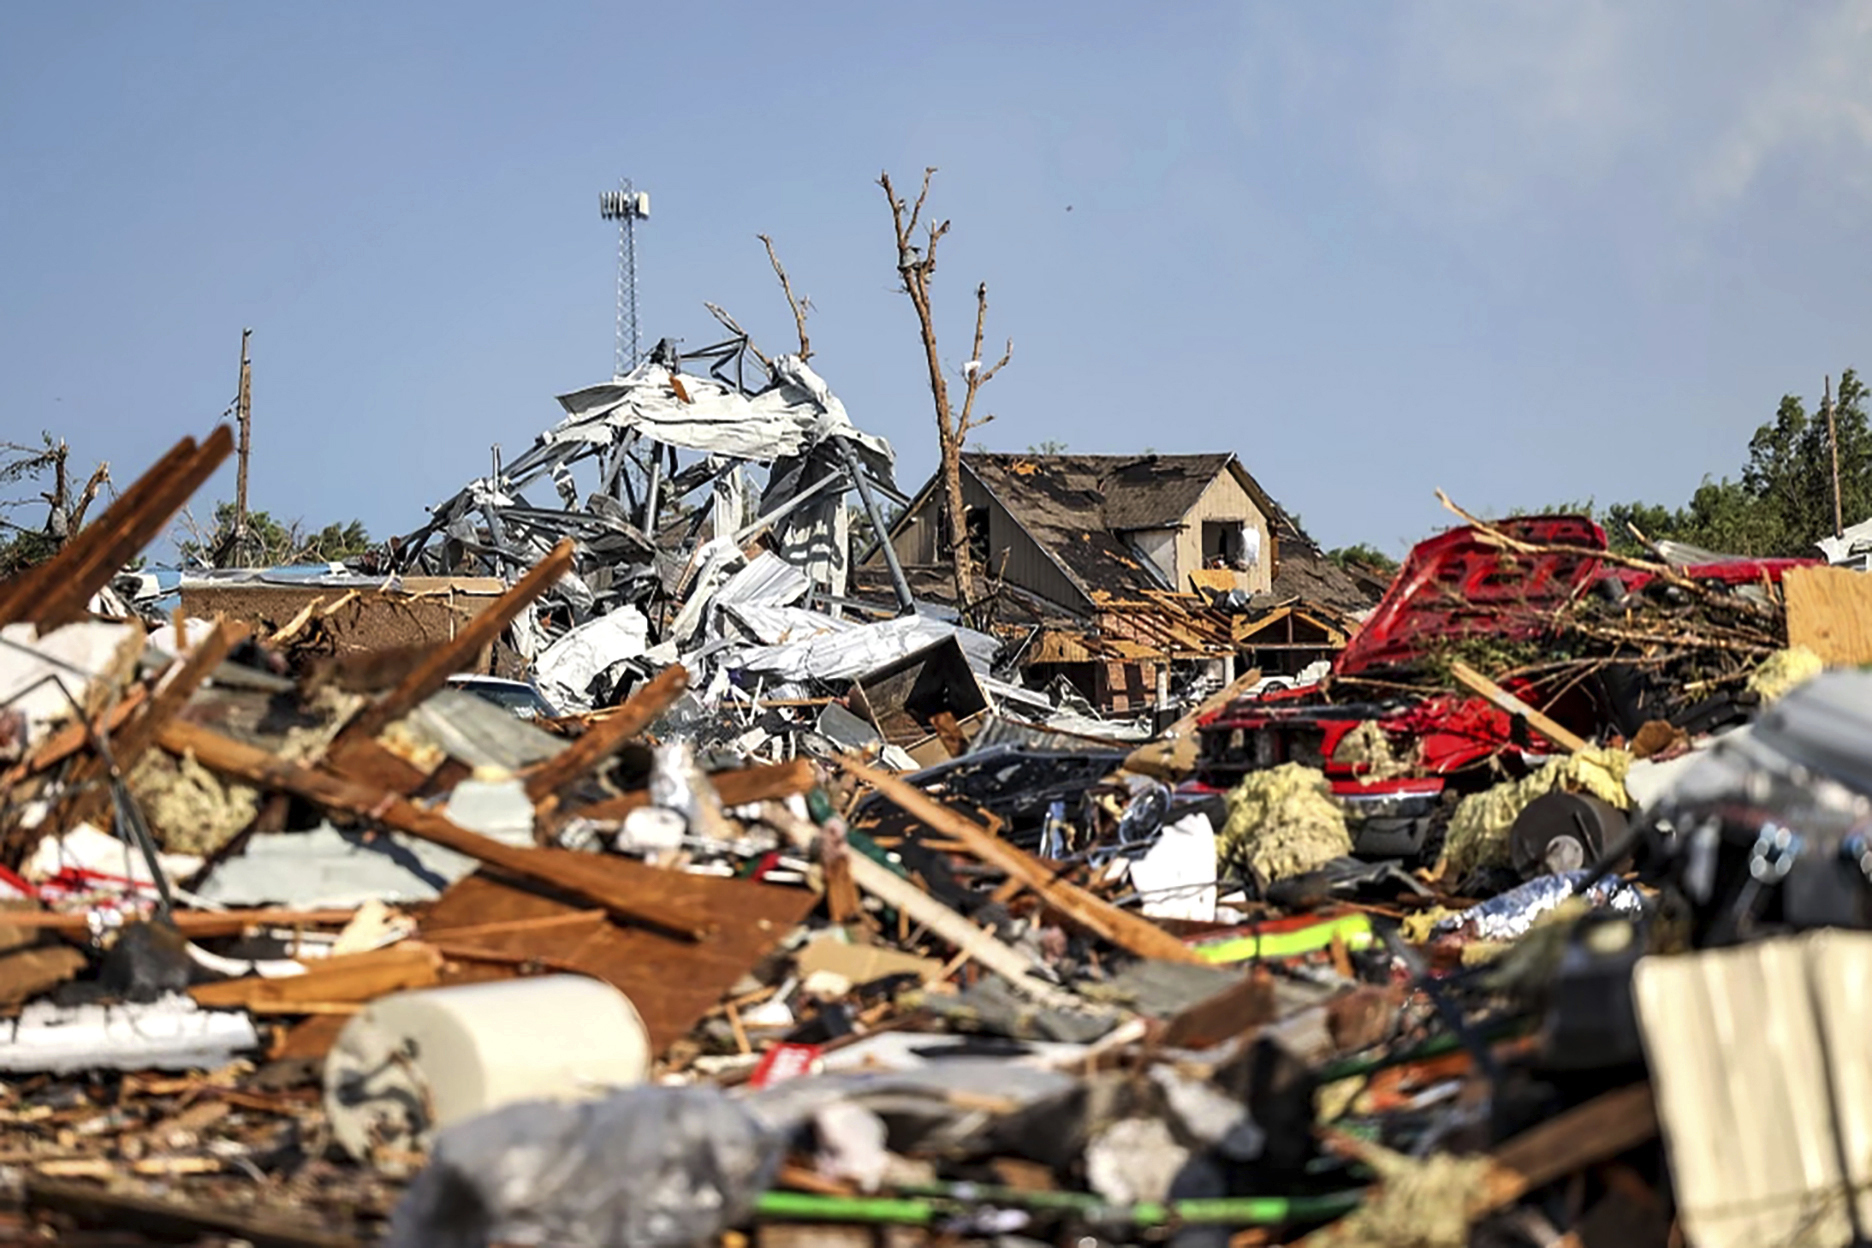 Texas town devastated by tornado, 5 dead across South from severe